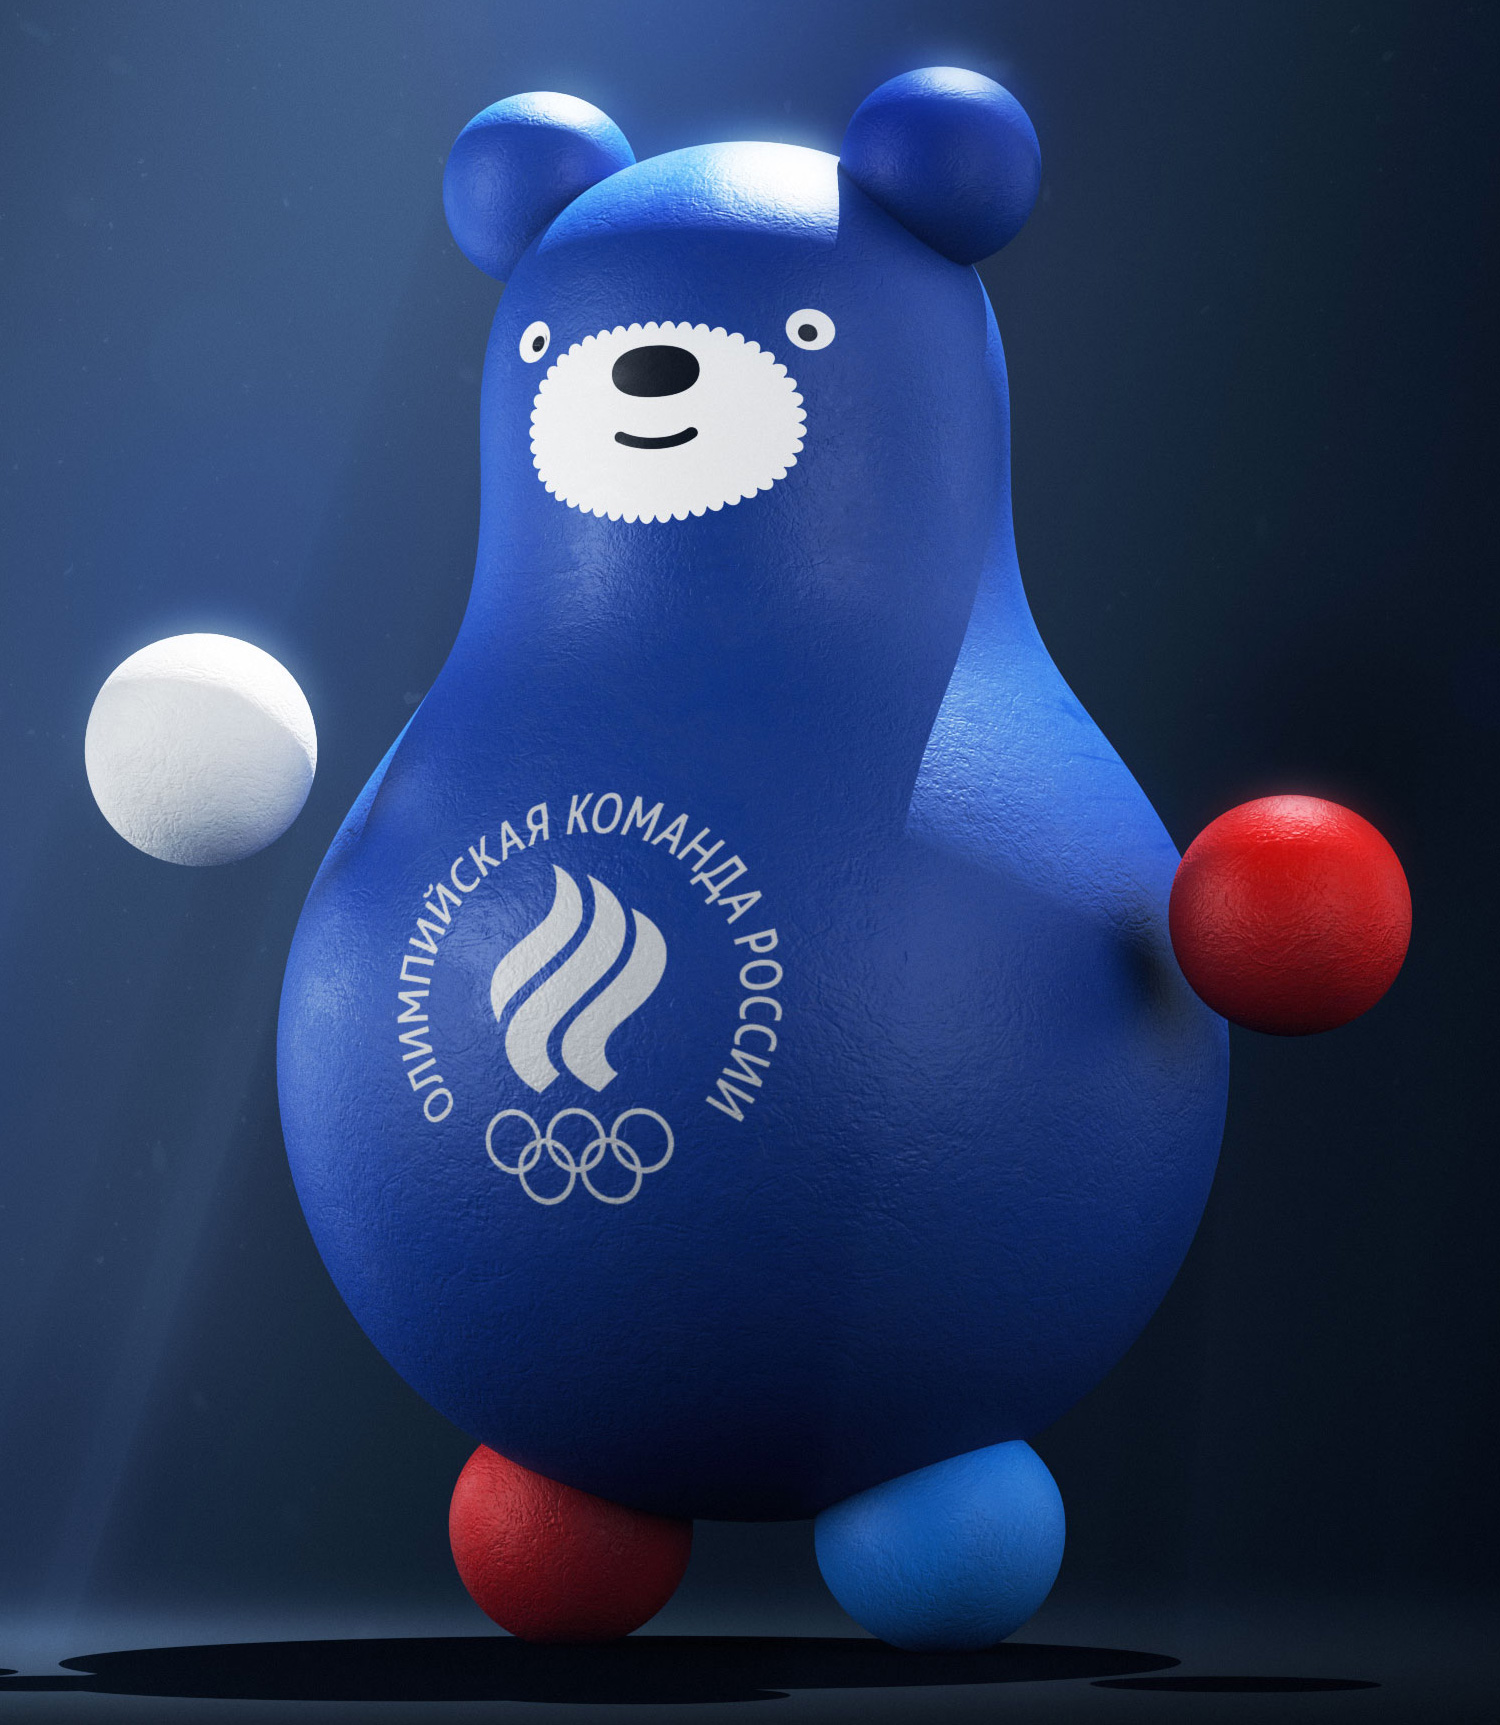 New Mascots for Team Russia by Art. Lebedev Studio